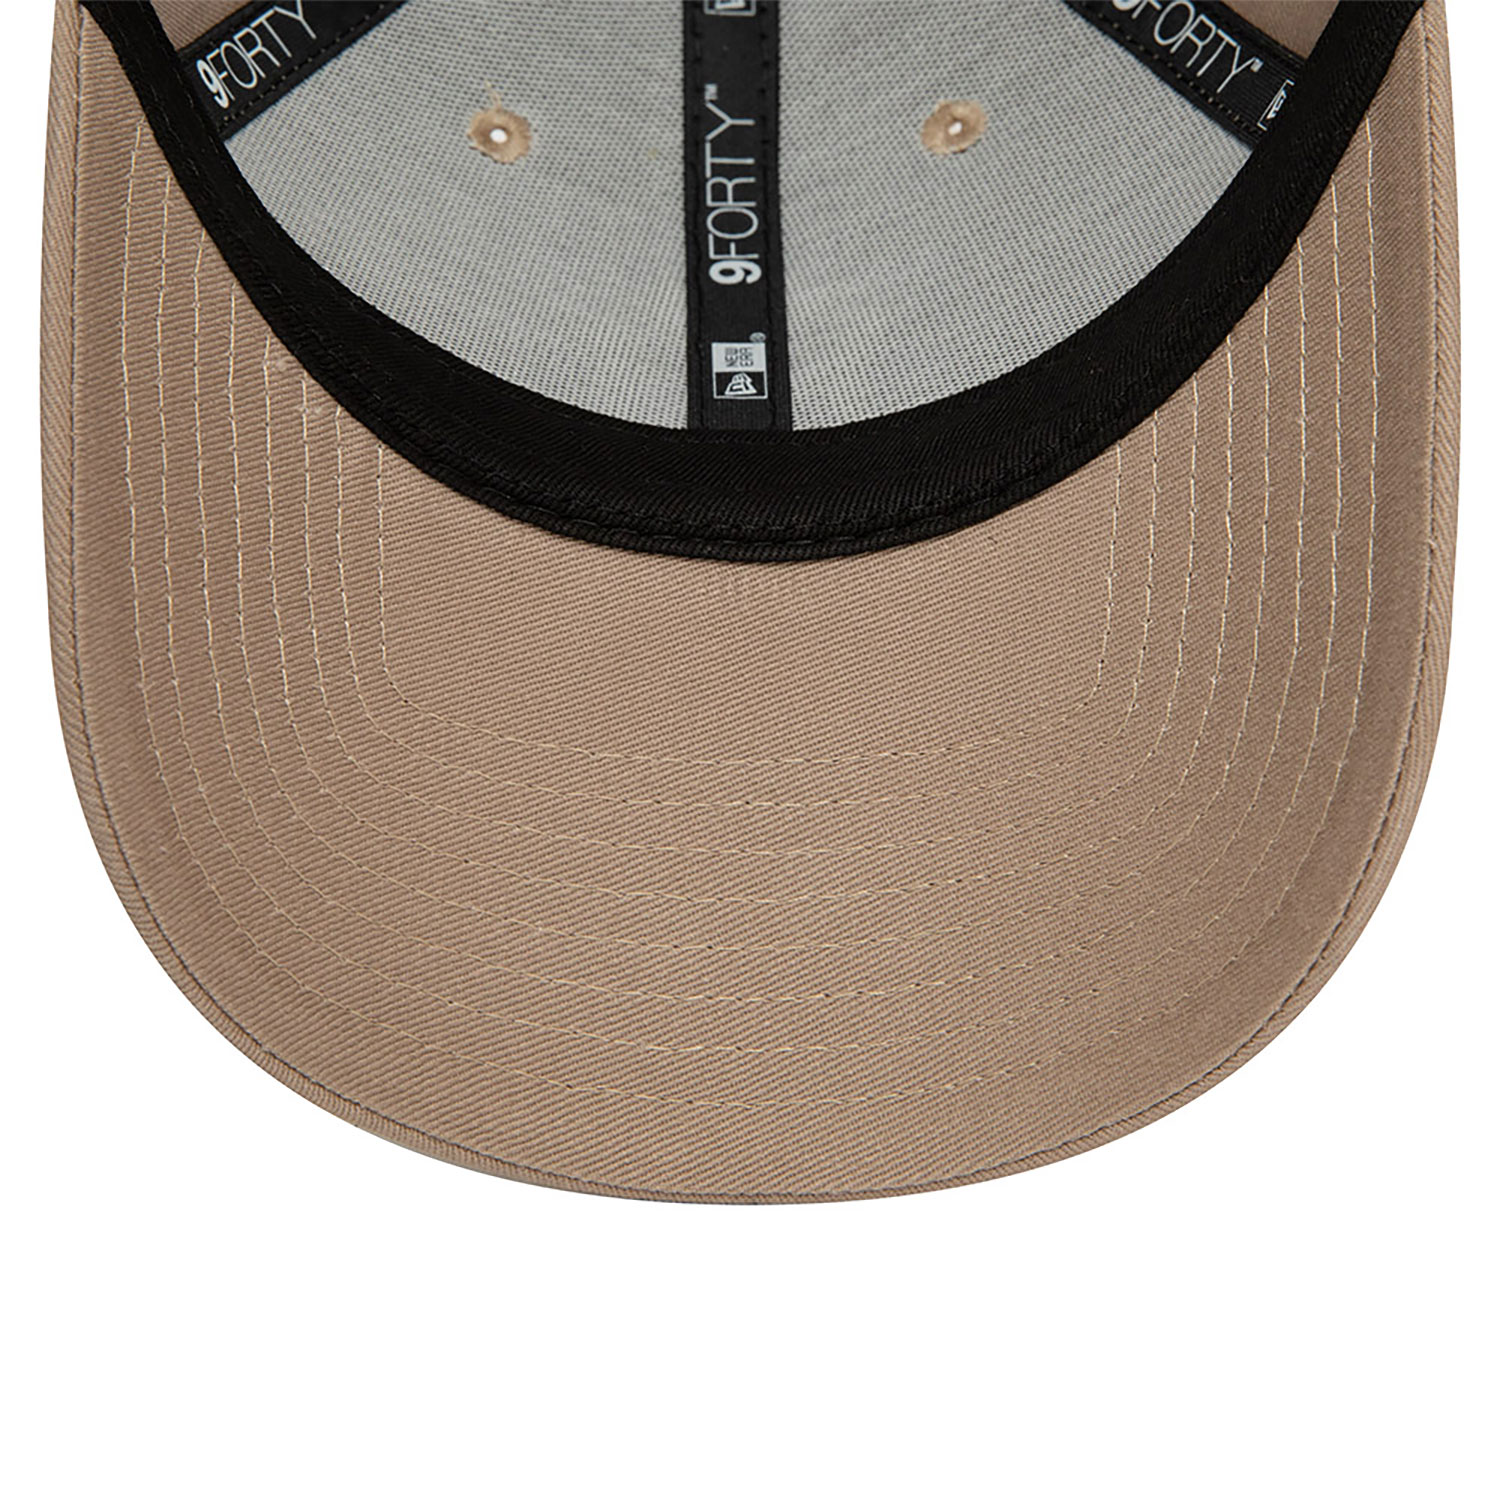 New York Yankees League Essential Brown 9FORTY Adjustable Cap